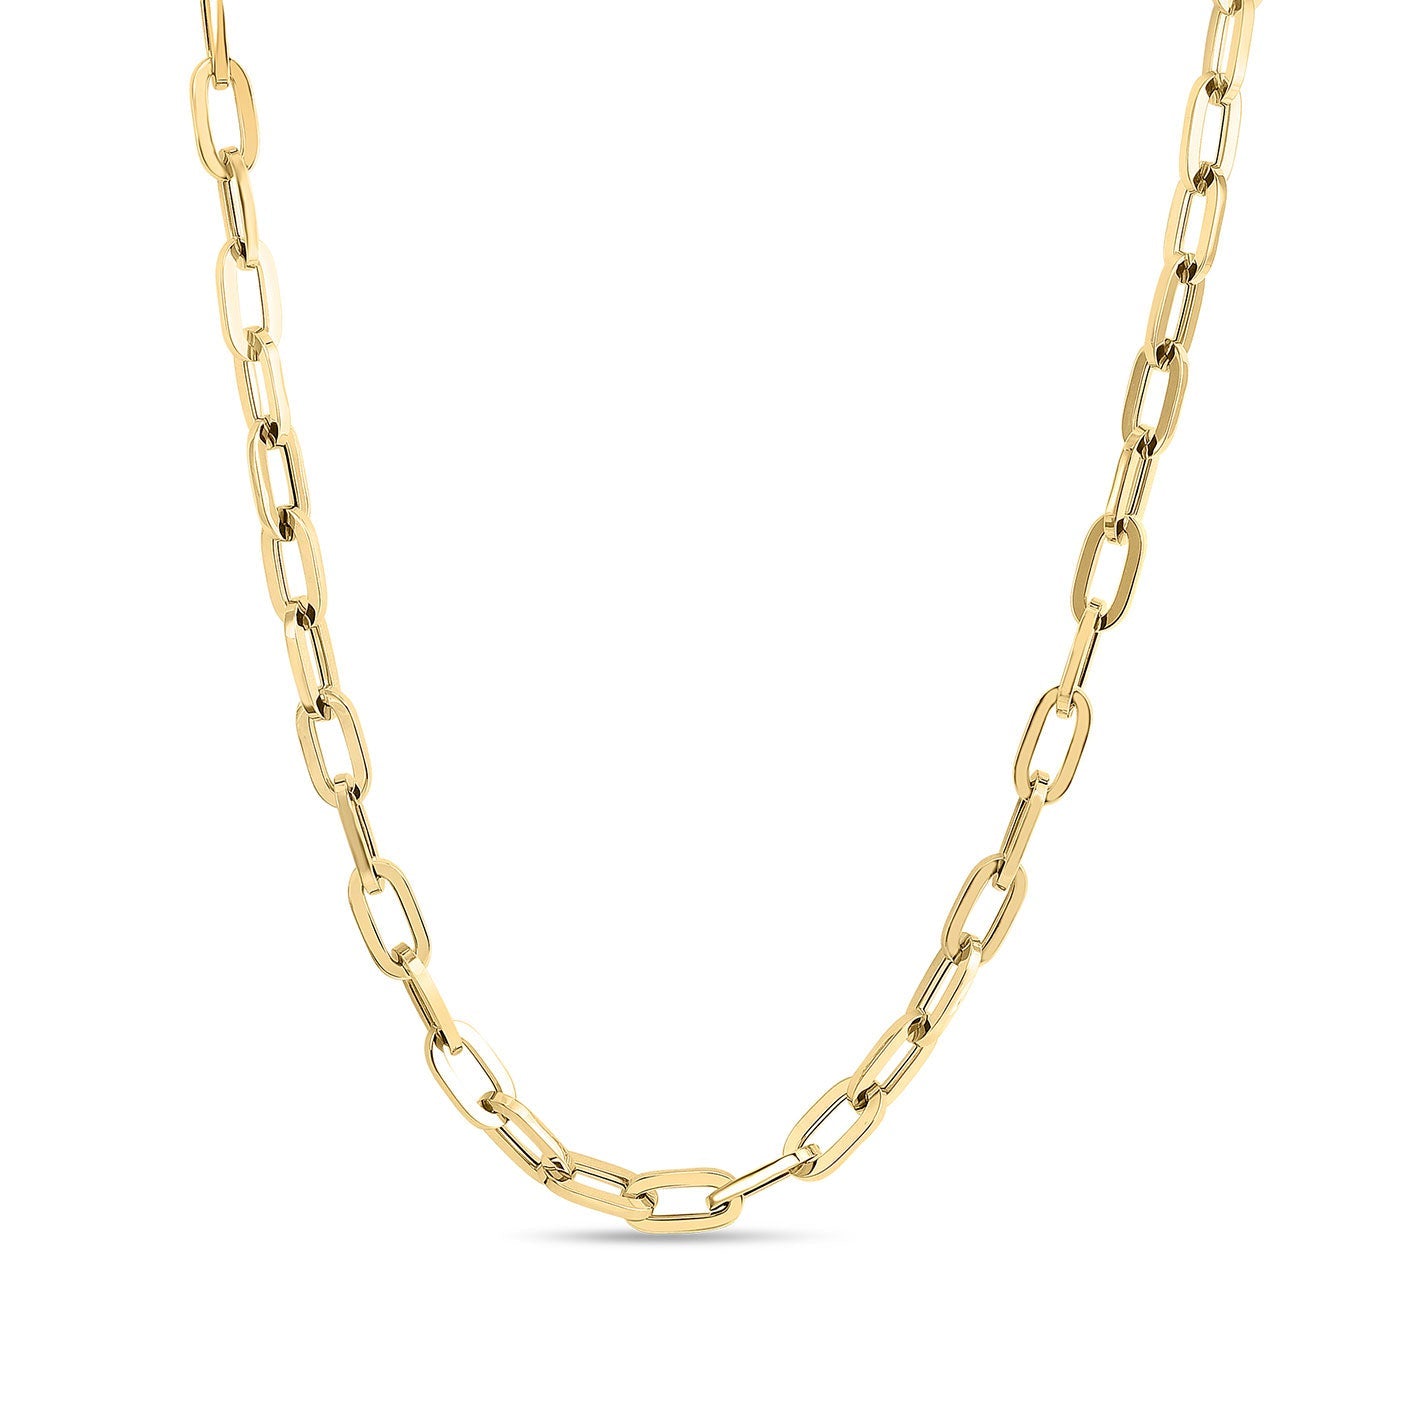 Roberto Coin Designer 18K Yellow Gold Heavy Gauge Paper Clip Link Chain Necklace